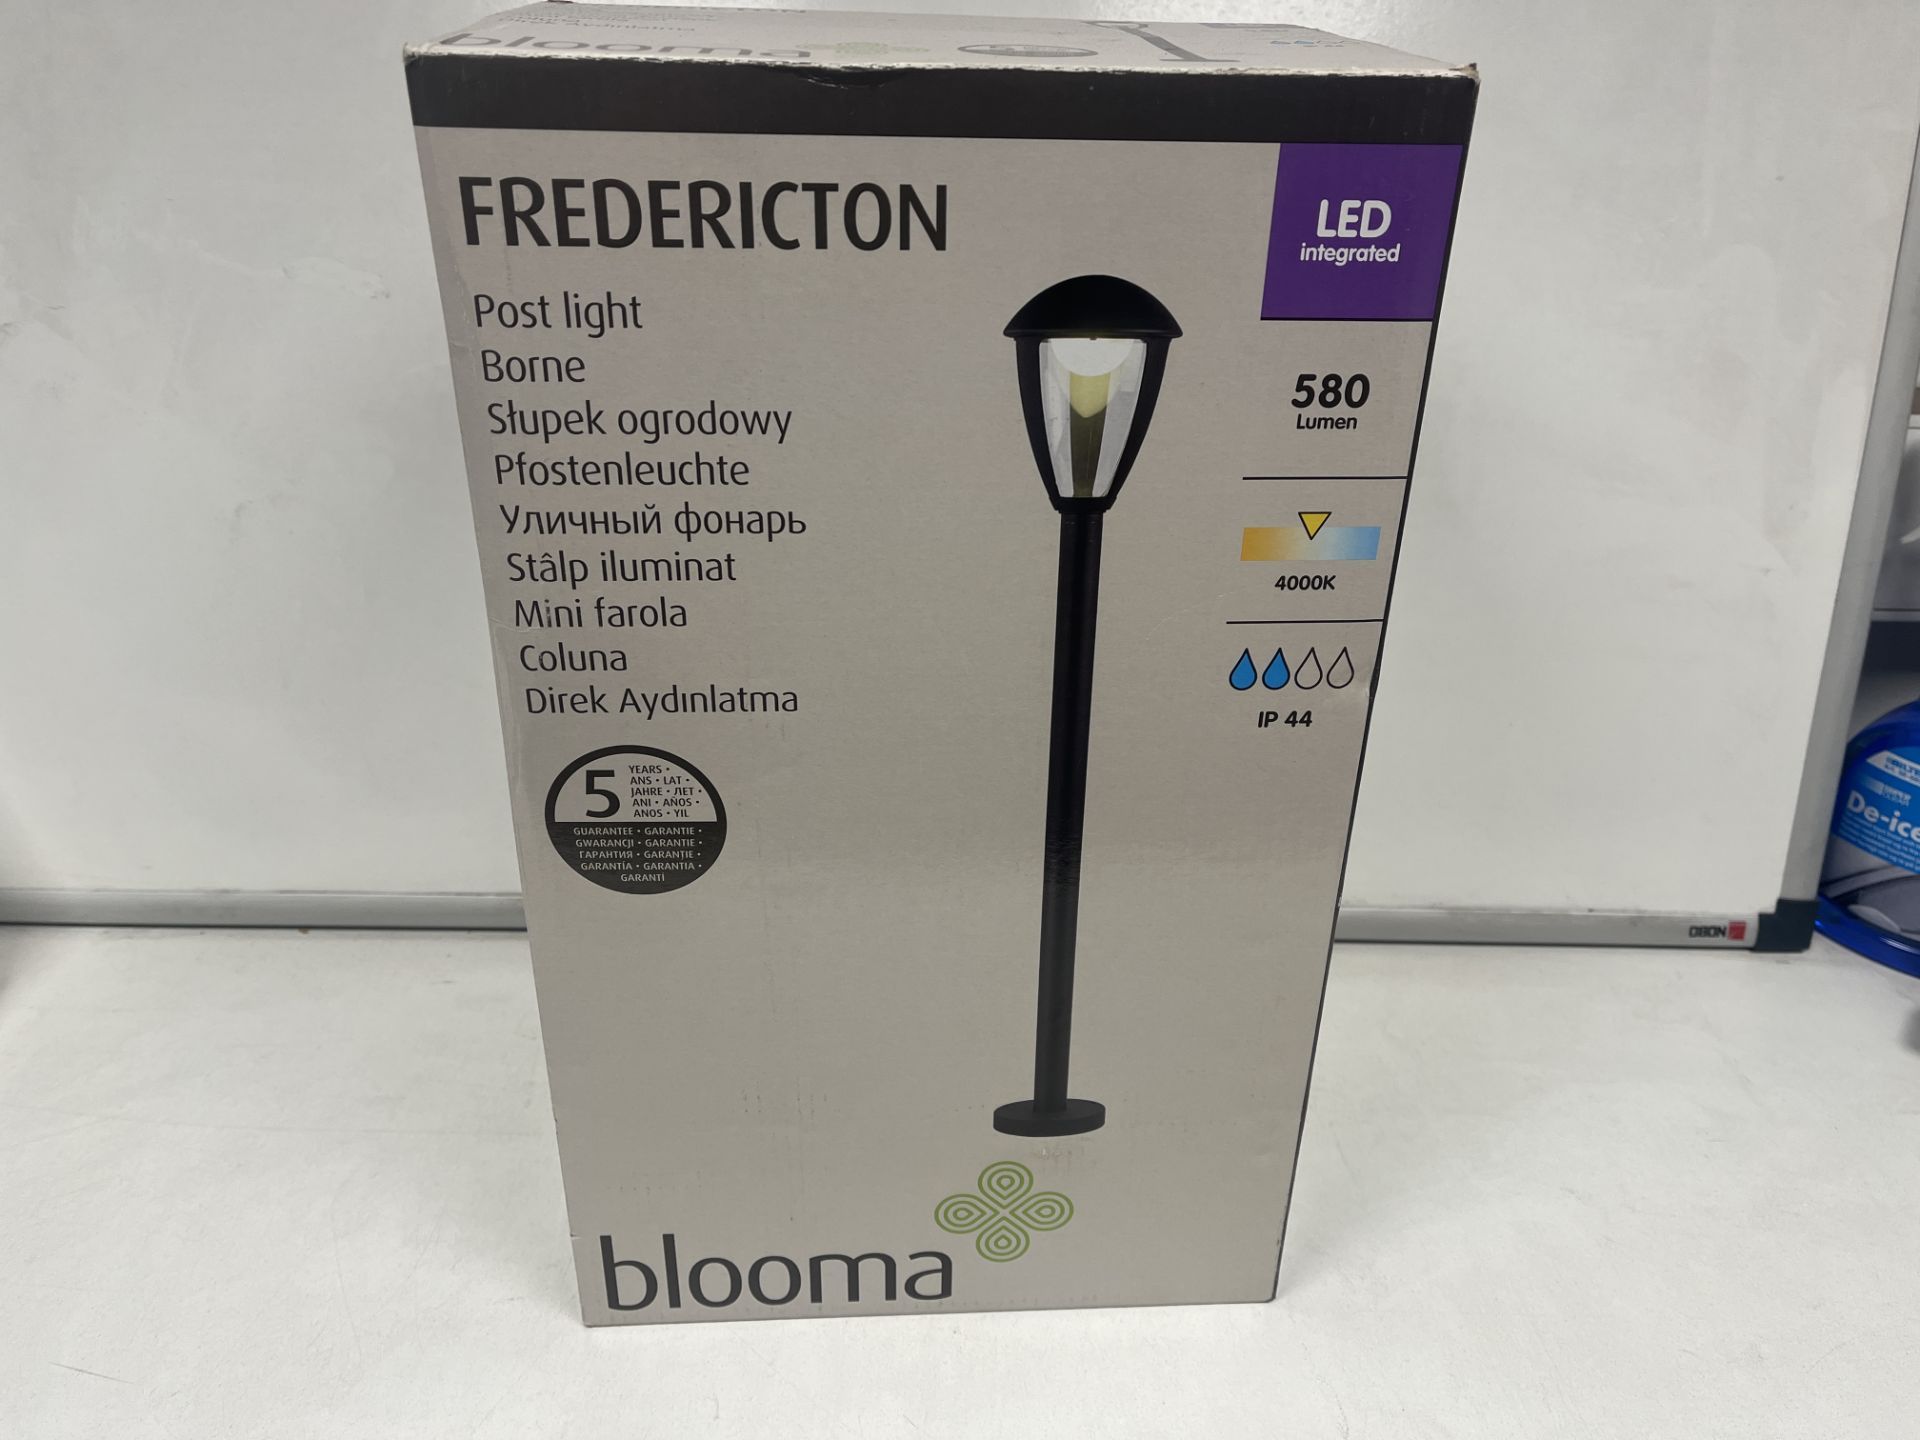 4 x NEW BOXED BLOOMA FREDERICTON LED POST LIGHTS. 580 LUMEN. IP44 RATED. ROW 13 RACK